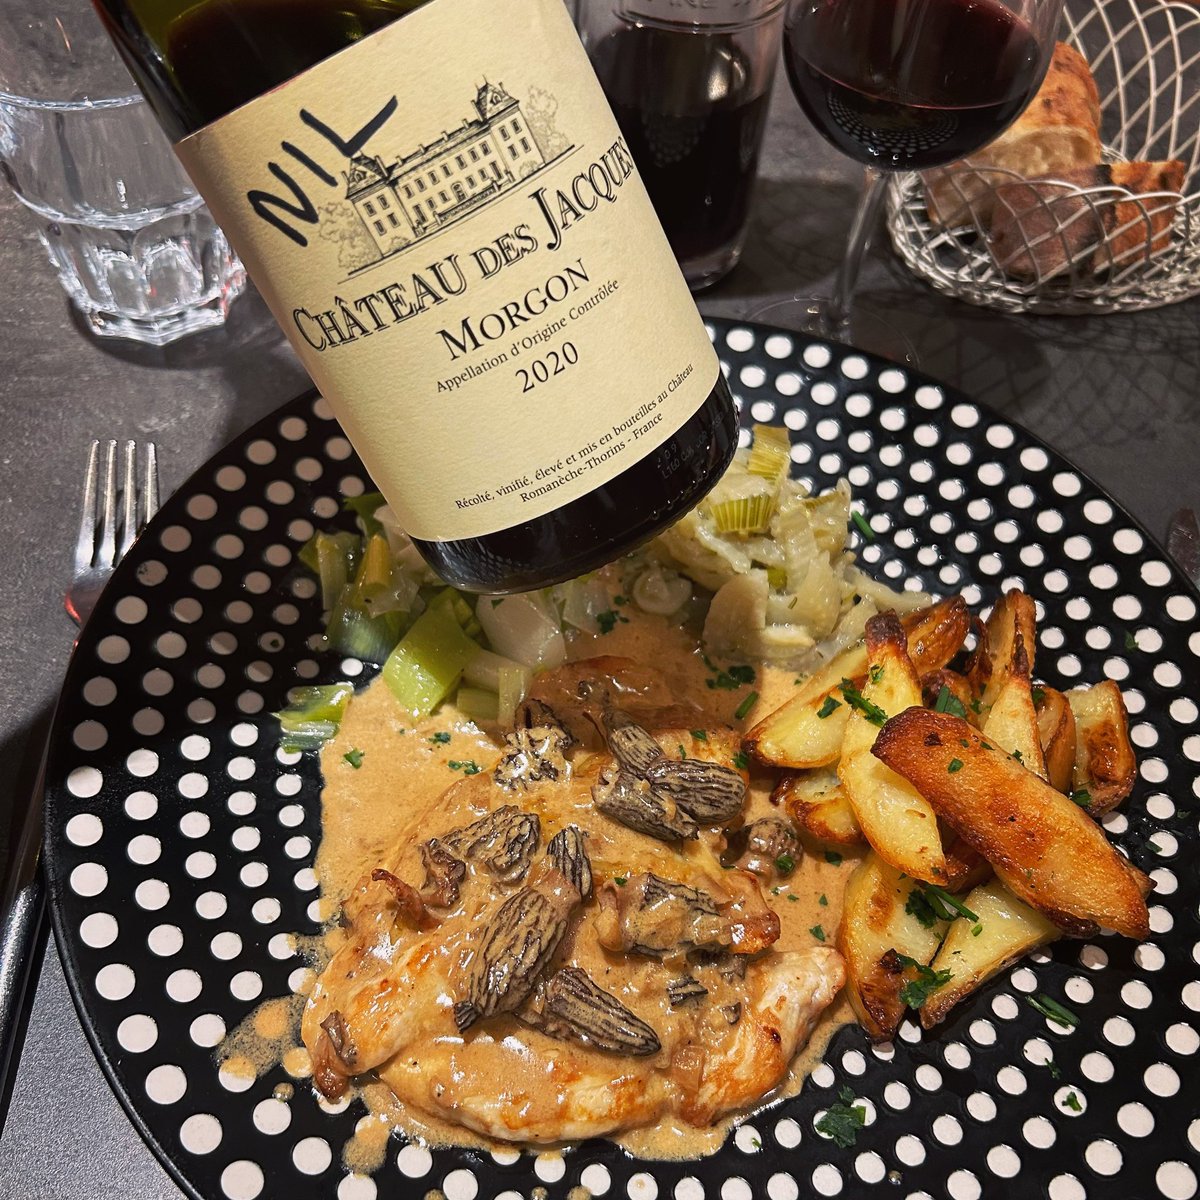 Burning through the classics w/ this poulet fermier aux morilles. When I saw this #Morgon for €27, it had my name all over it (my name in French is 'Nil', or 'emptiness'). Blend of three vineyards: Côte du Py, Bellevue & Roche Noire, on pink granite & blue diorite. #beaujolais